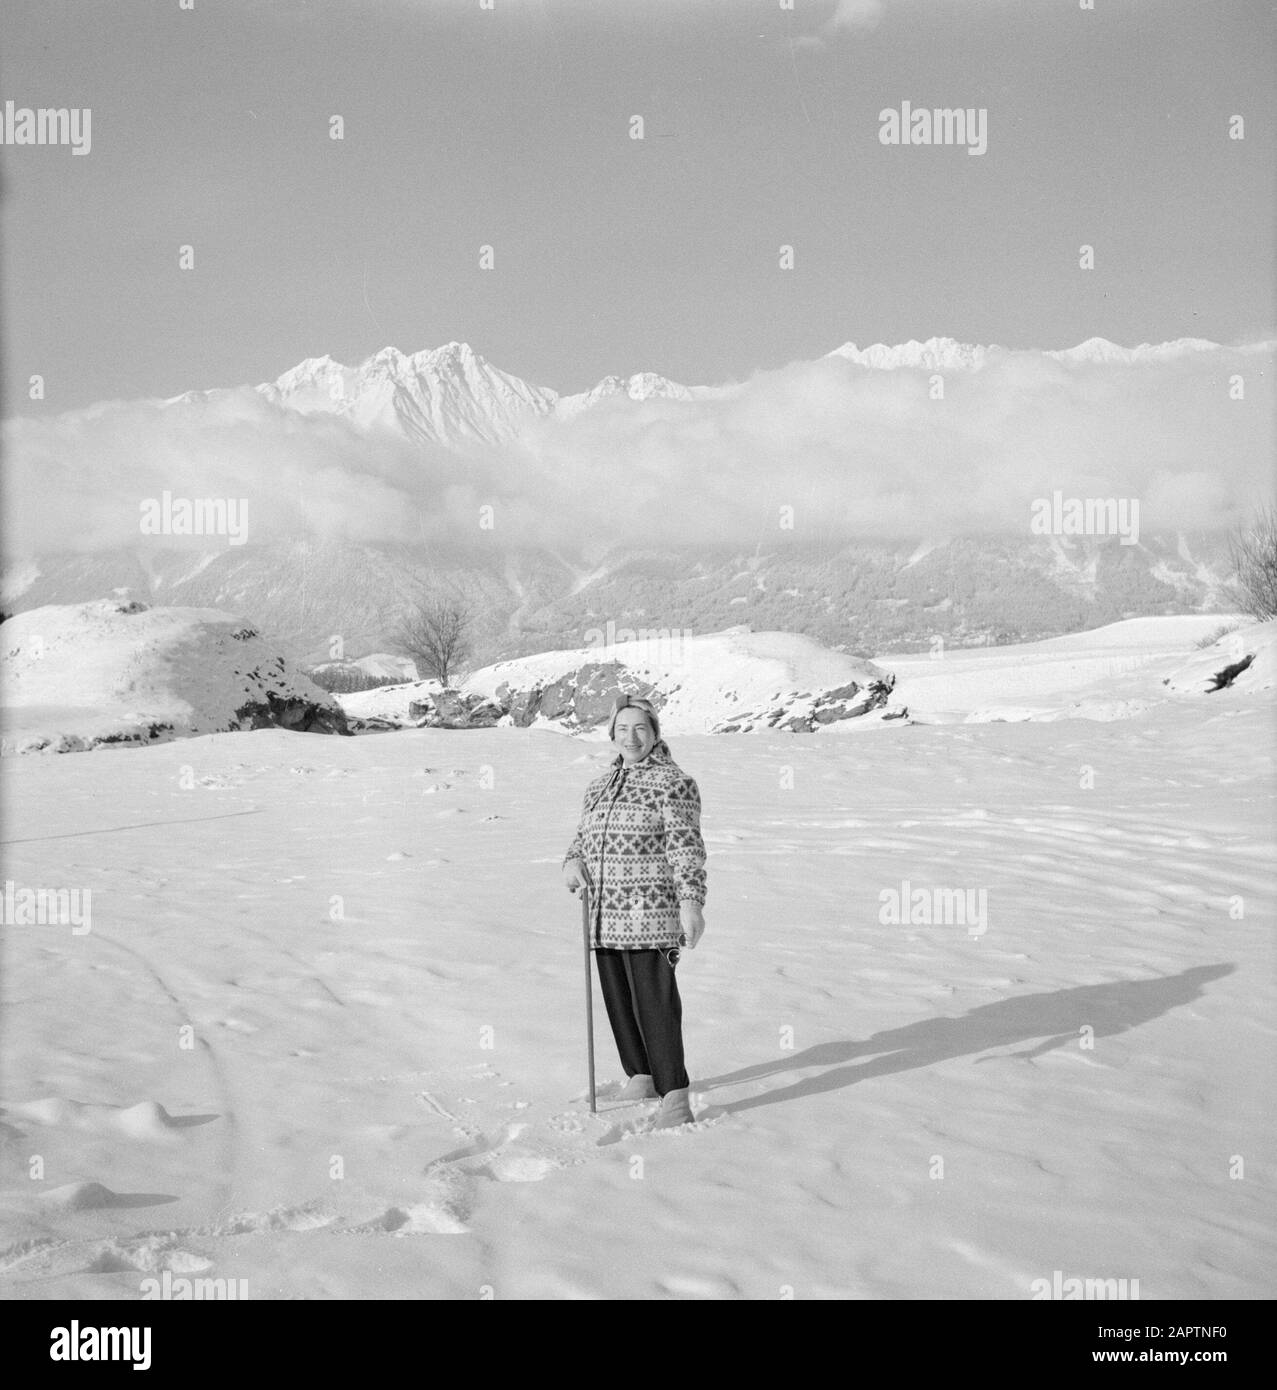 Winter in Tyrol  Hilde Eschen poses in the snow with in the background the Karwendel Mountains Date: January 1960 Location: Austria, Sistrans, Tyrol Keywords: mountains, landscapes, snow, holiday, hiking, winter Personal name: Echen, Hilde Stock Photo